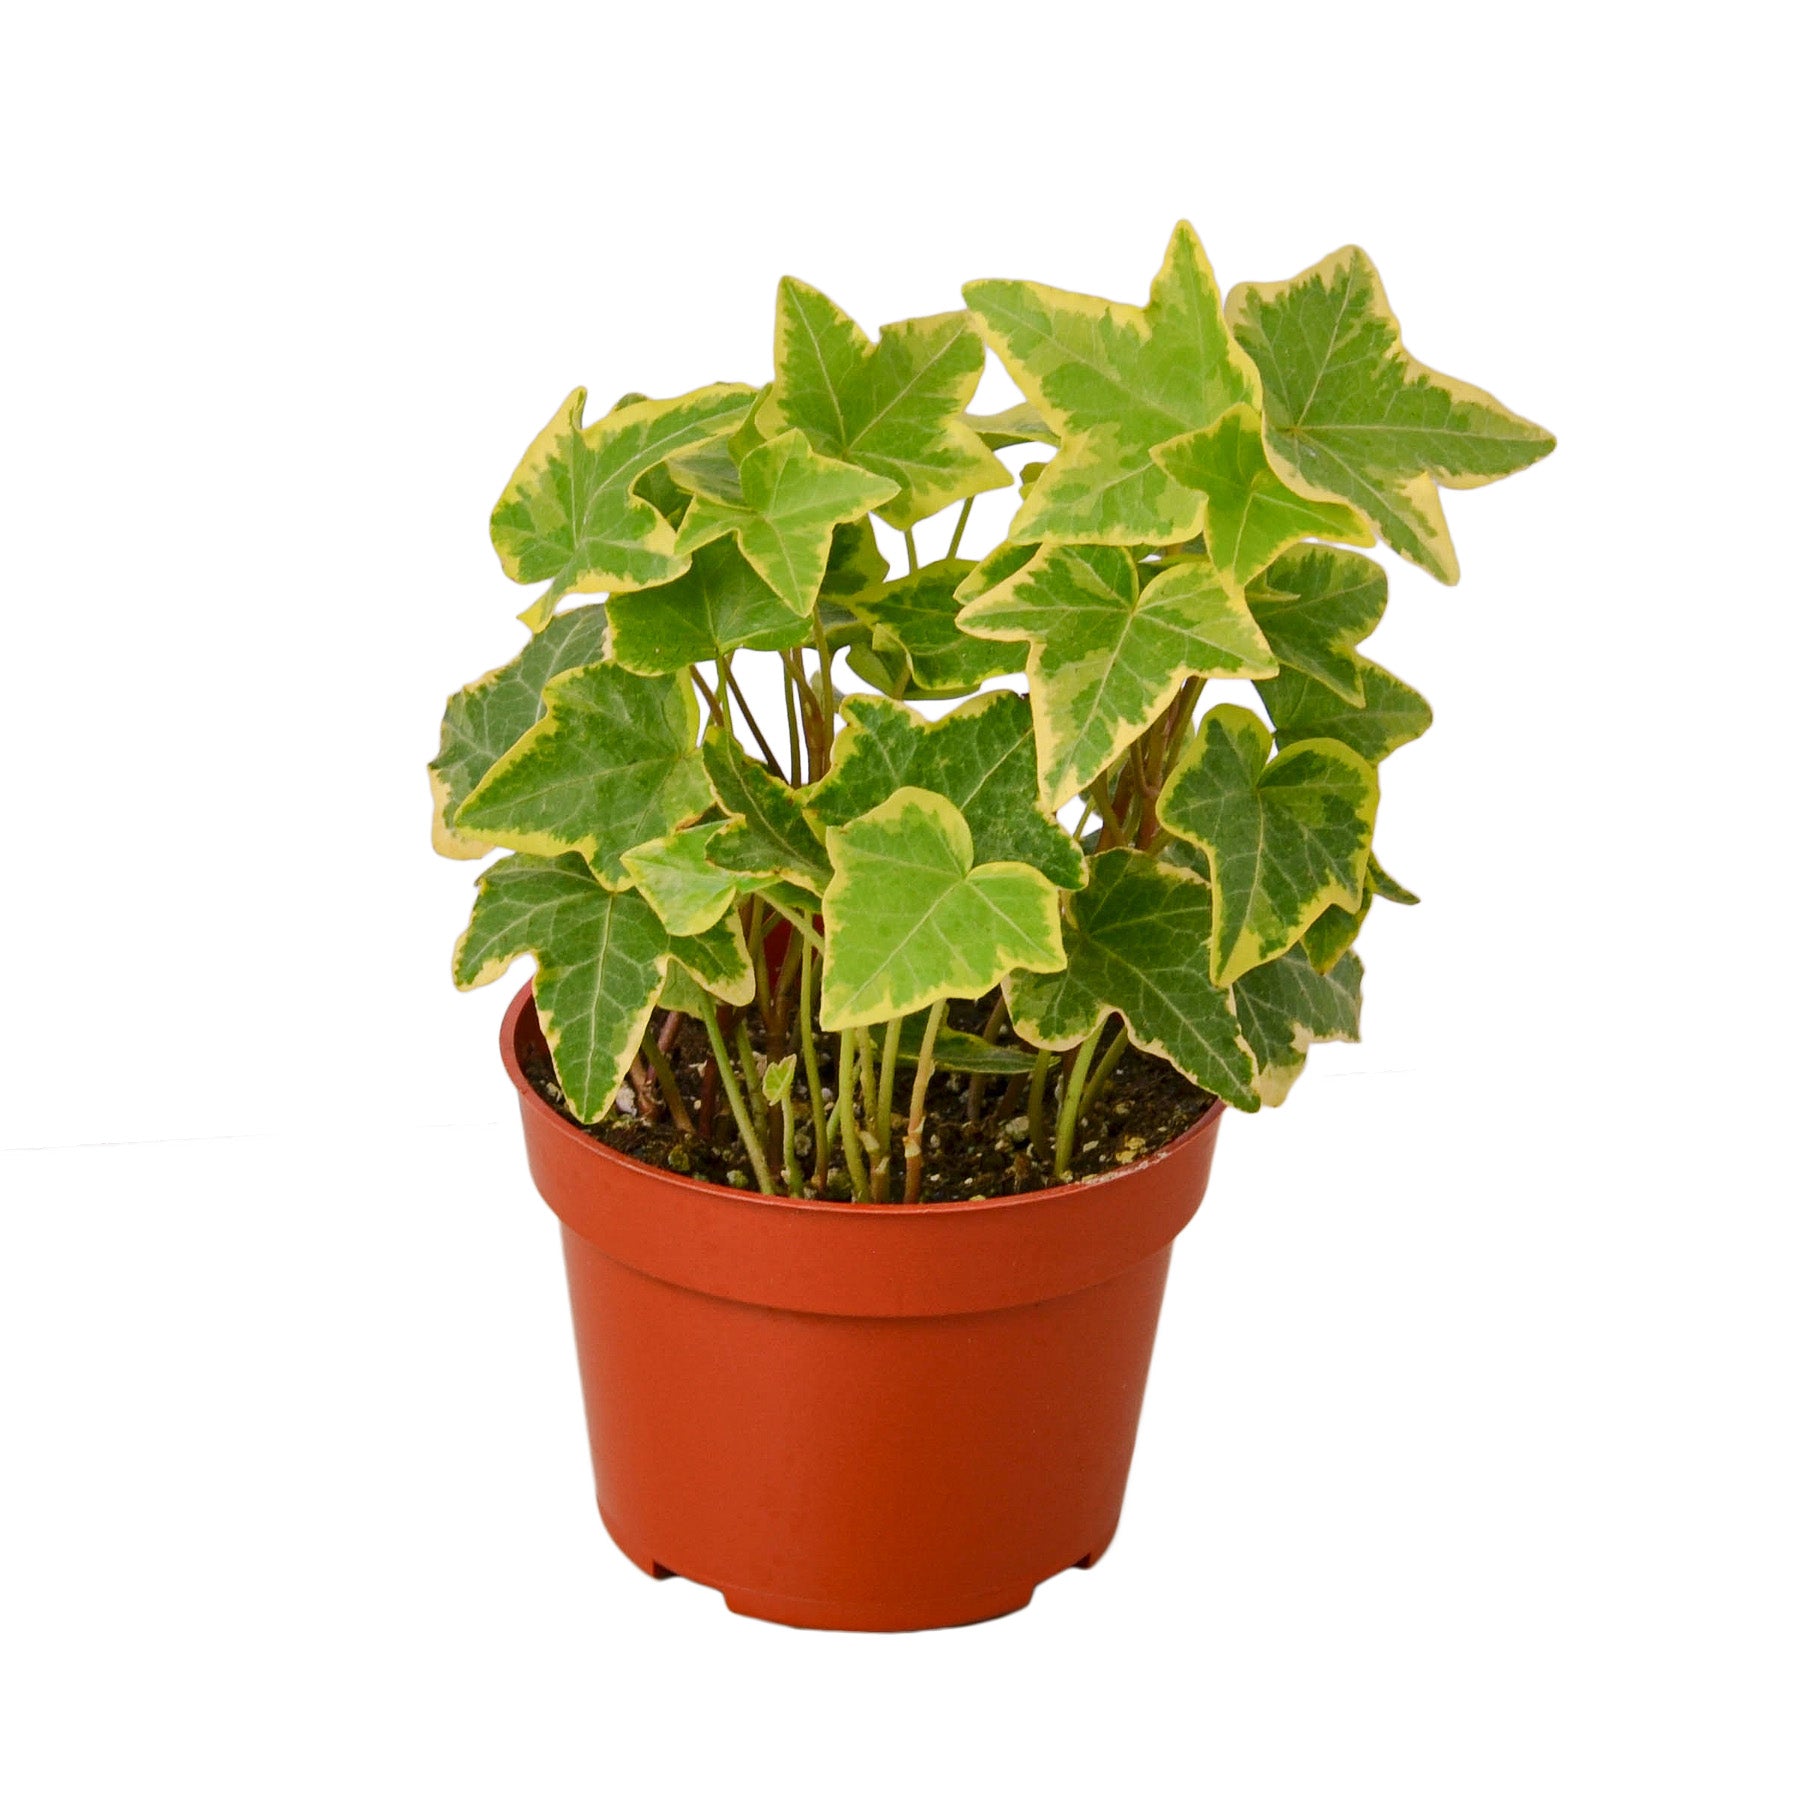 Ivy plant in a pot on a white background, perfect for your best garden nursery.